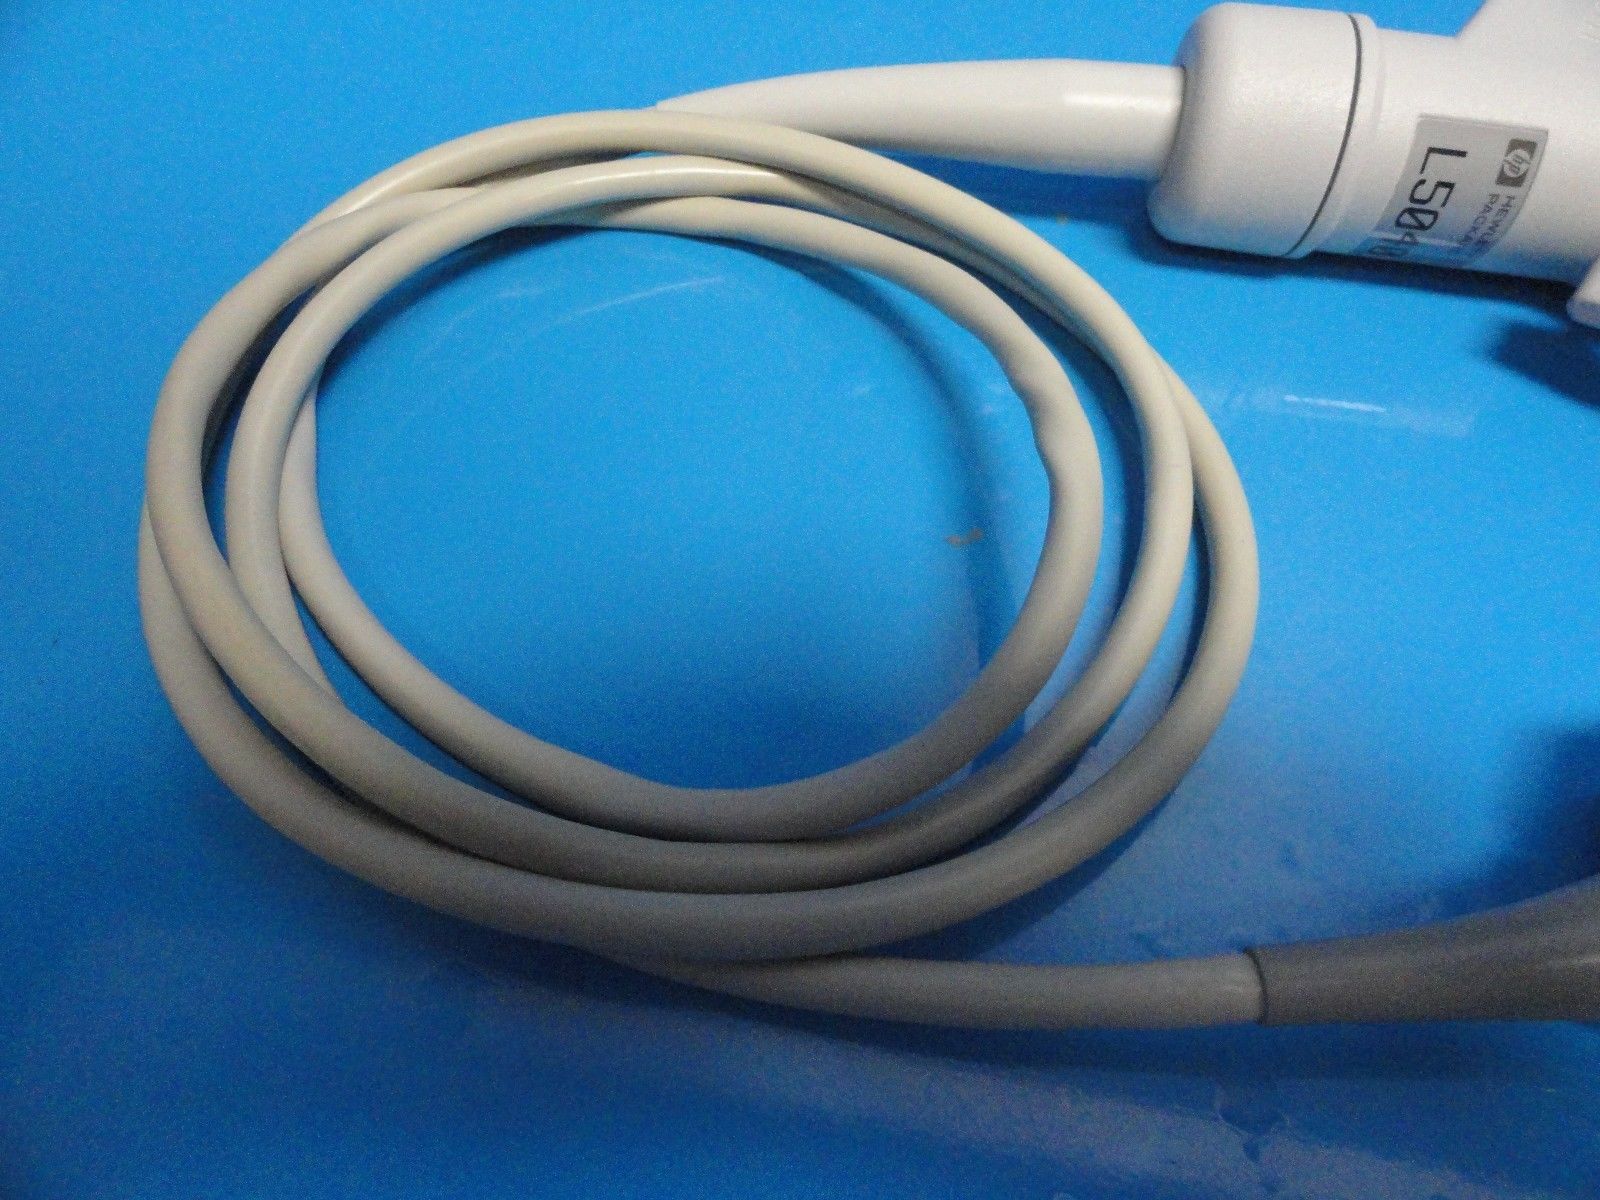 a close up of a white cord connected to a probe heas